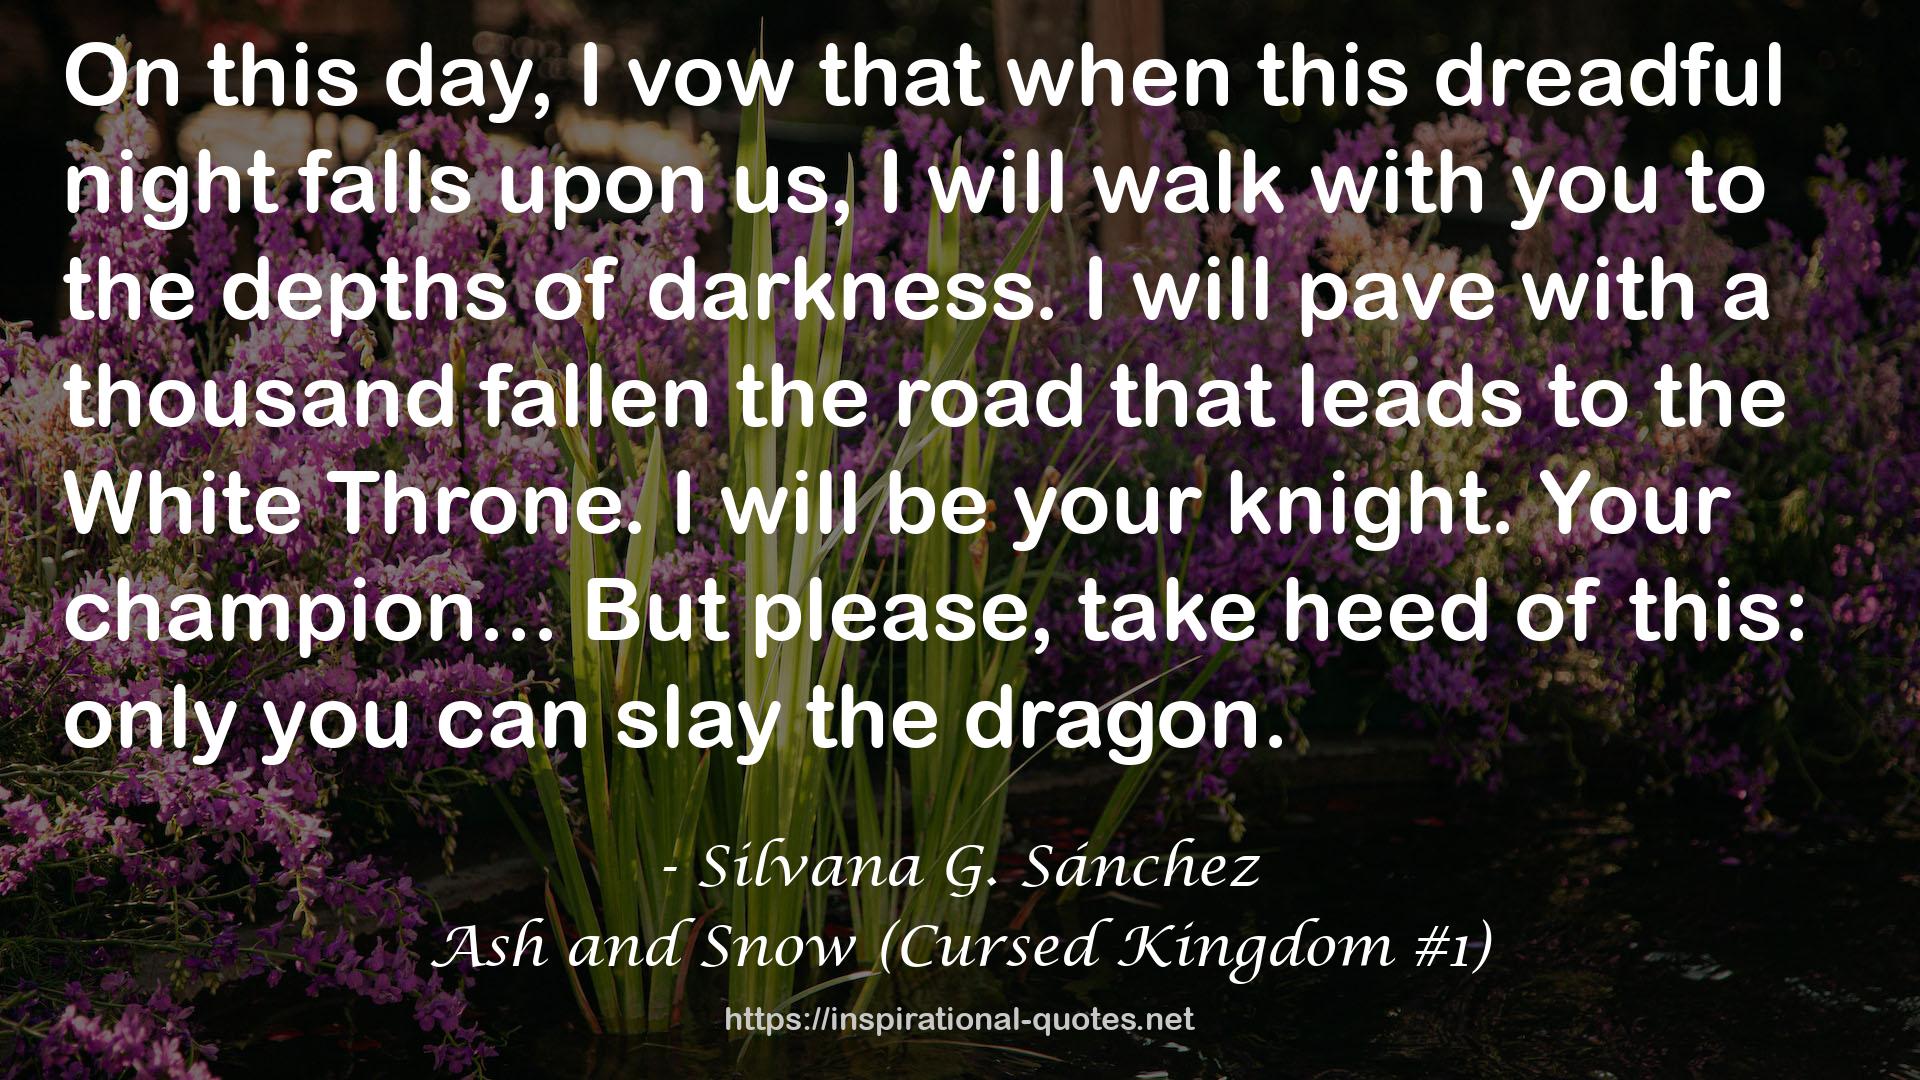 Ash and Snow (Cursed Kingdom #1) QUOTES